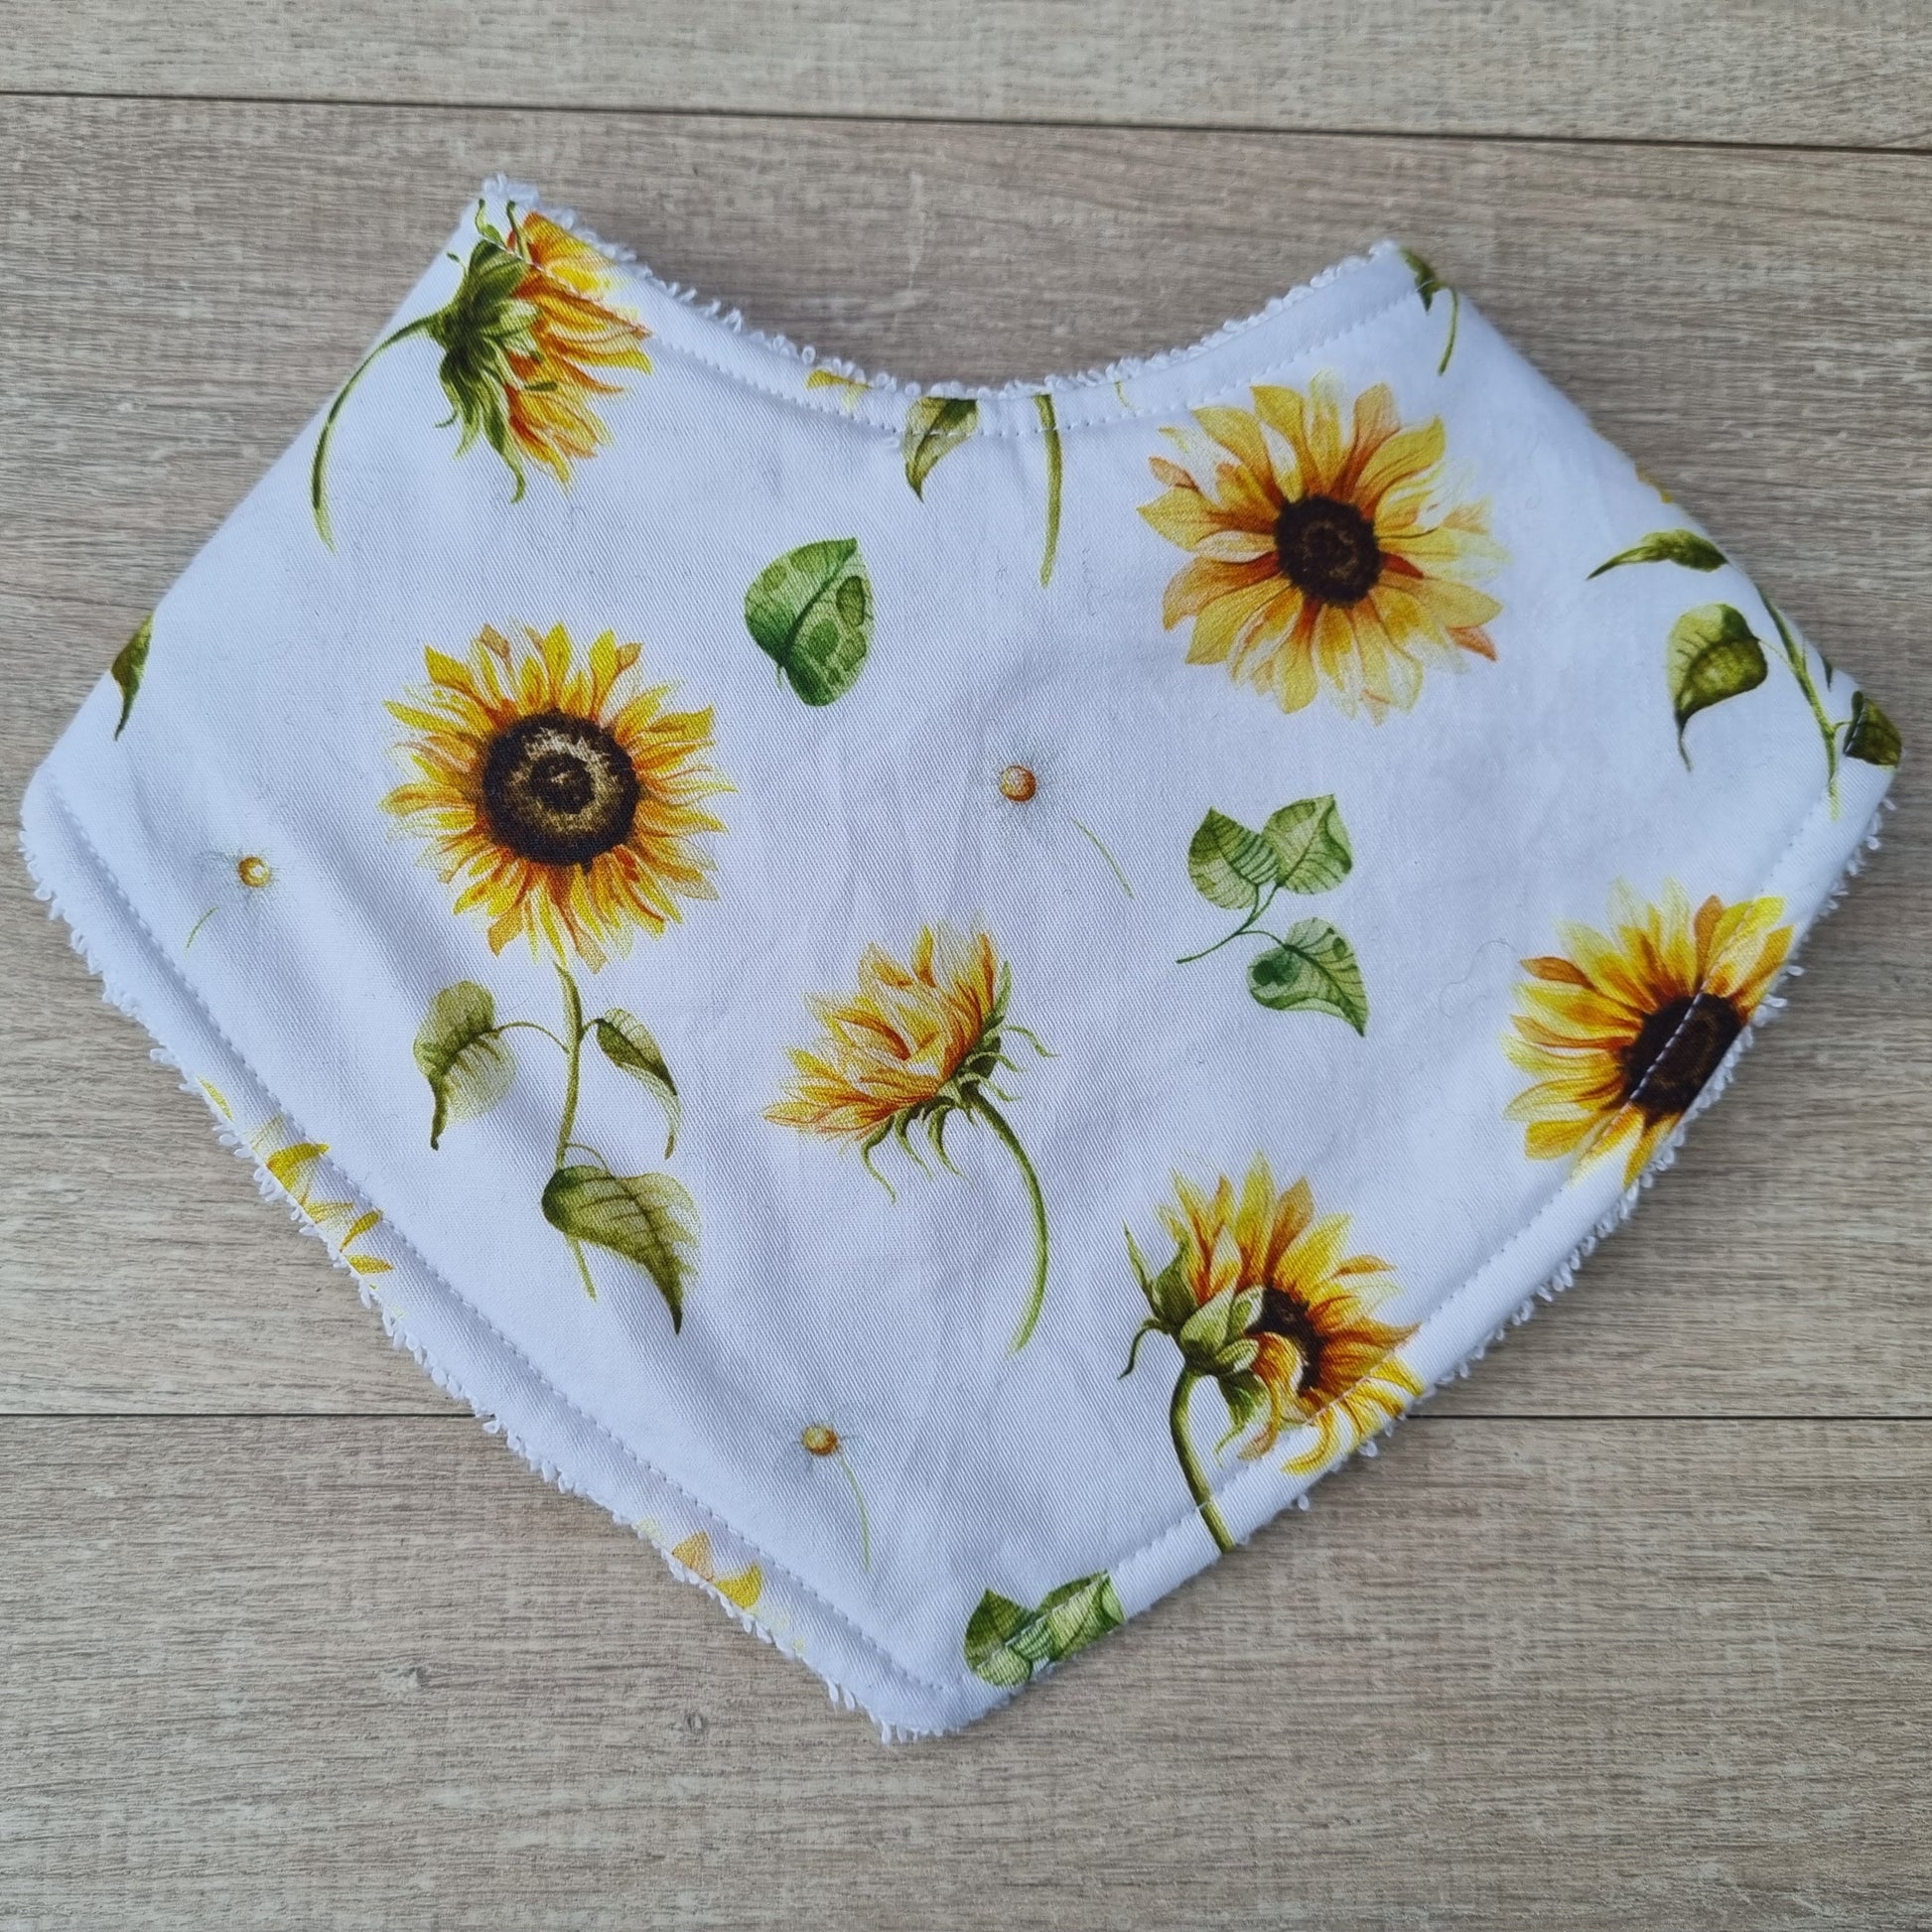 Dribble Bib - Sunflowers against wooden backdrop. Yellow sunflowers on white background.